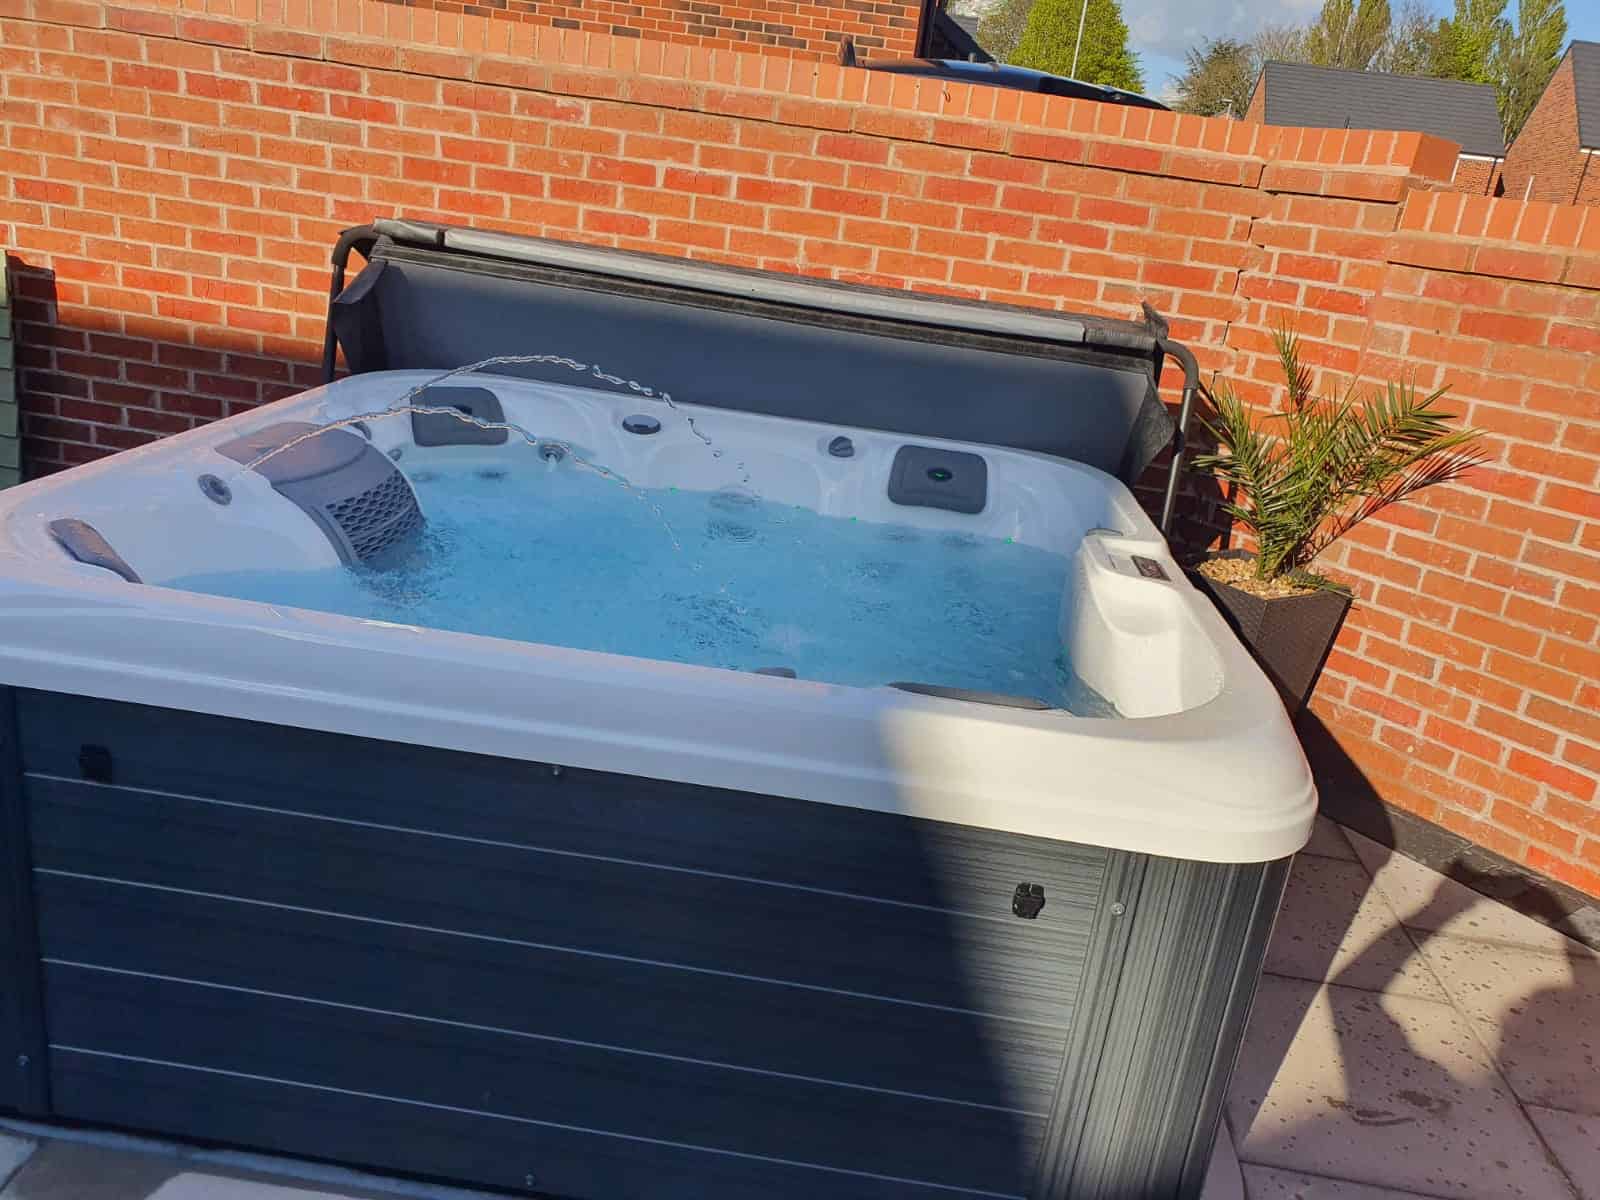 Hydro Hot tub review